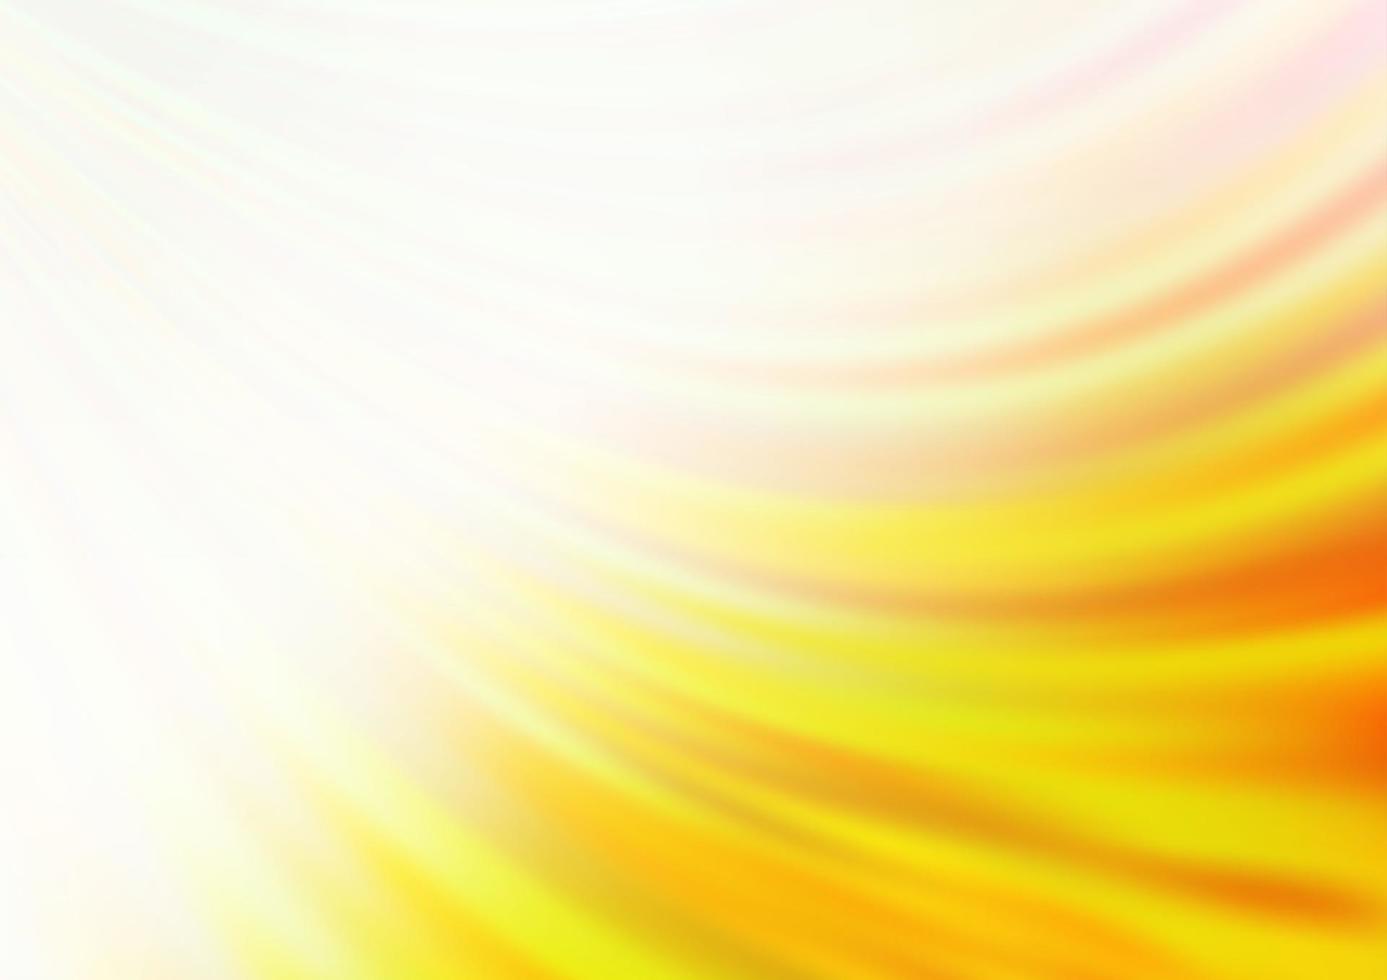 Light Yellow, Orange vector template with liquid shapes.